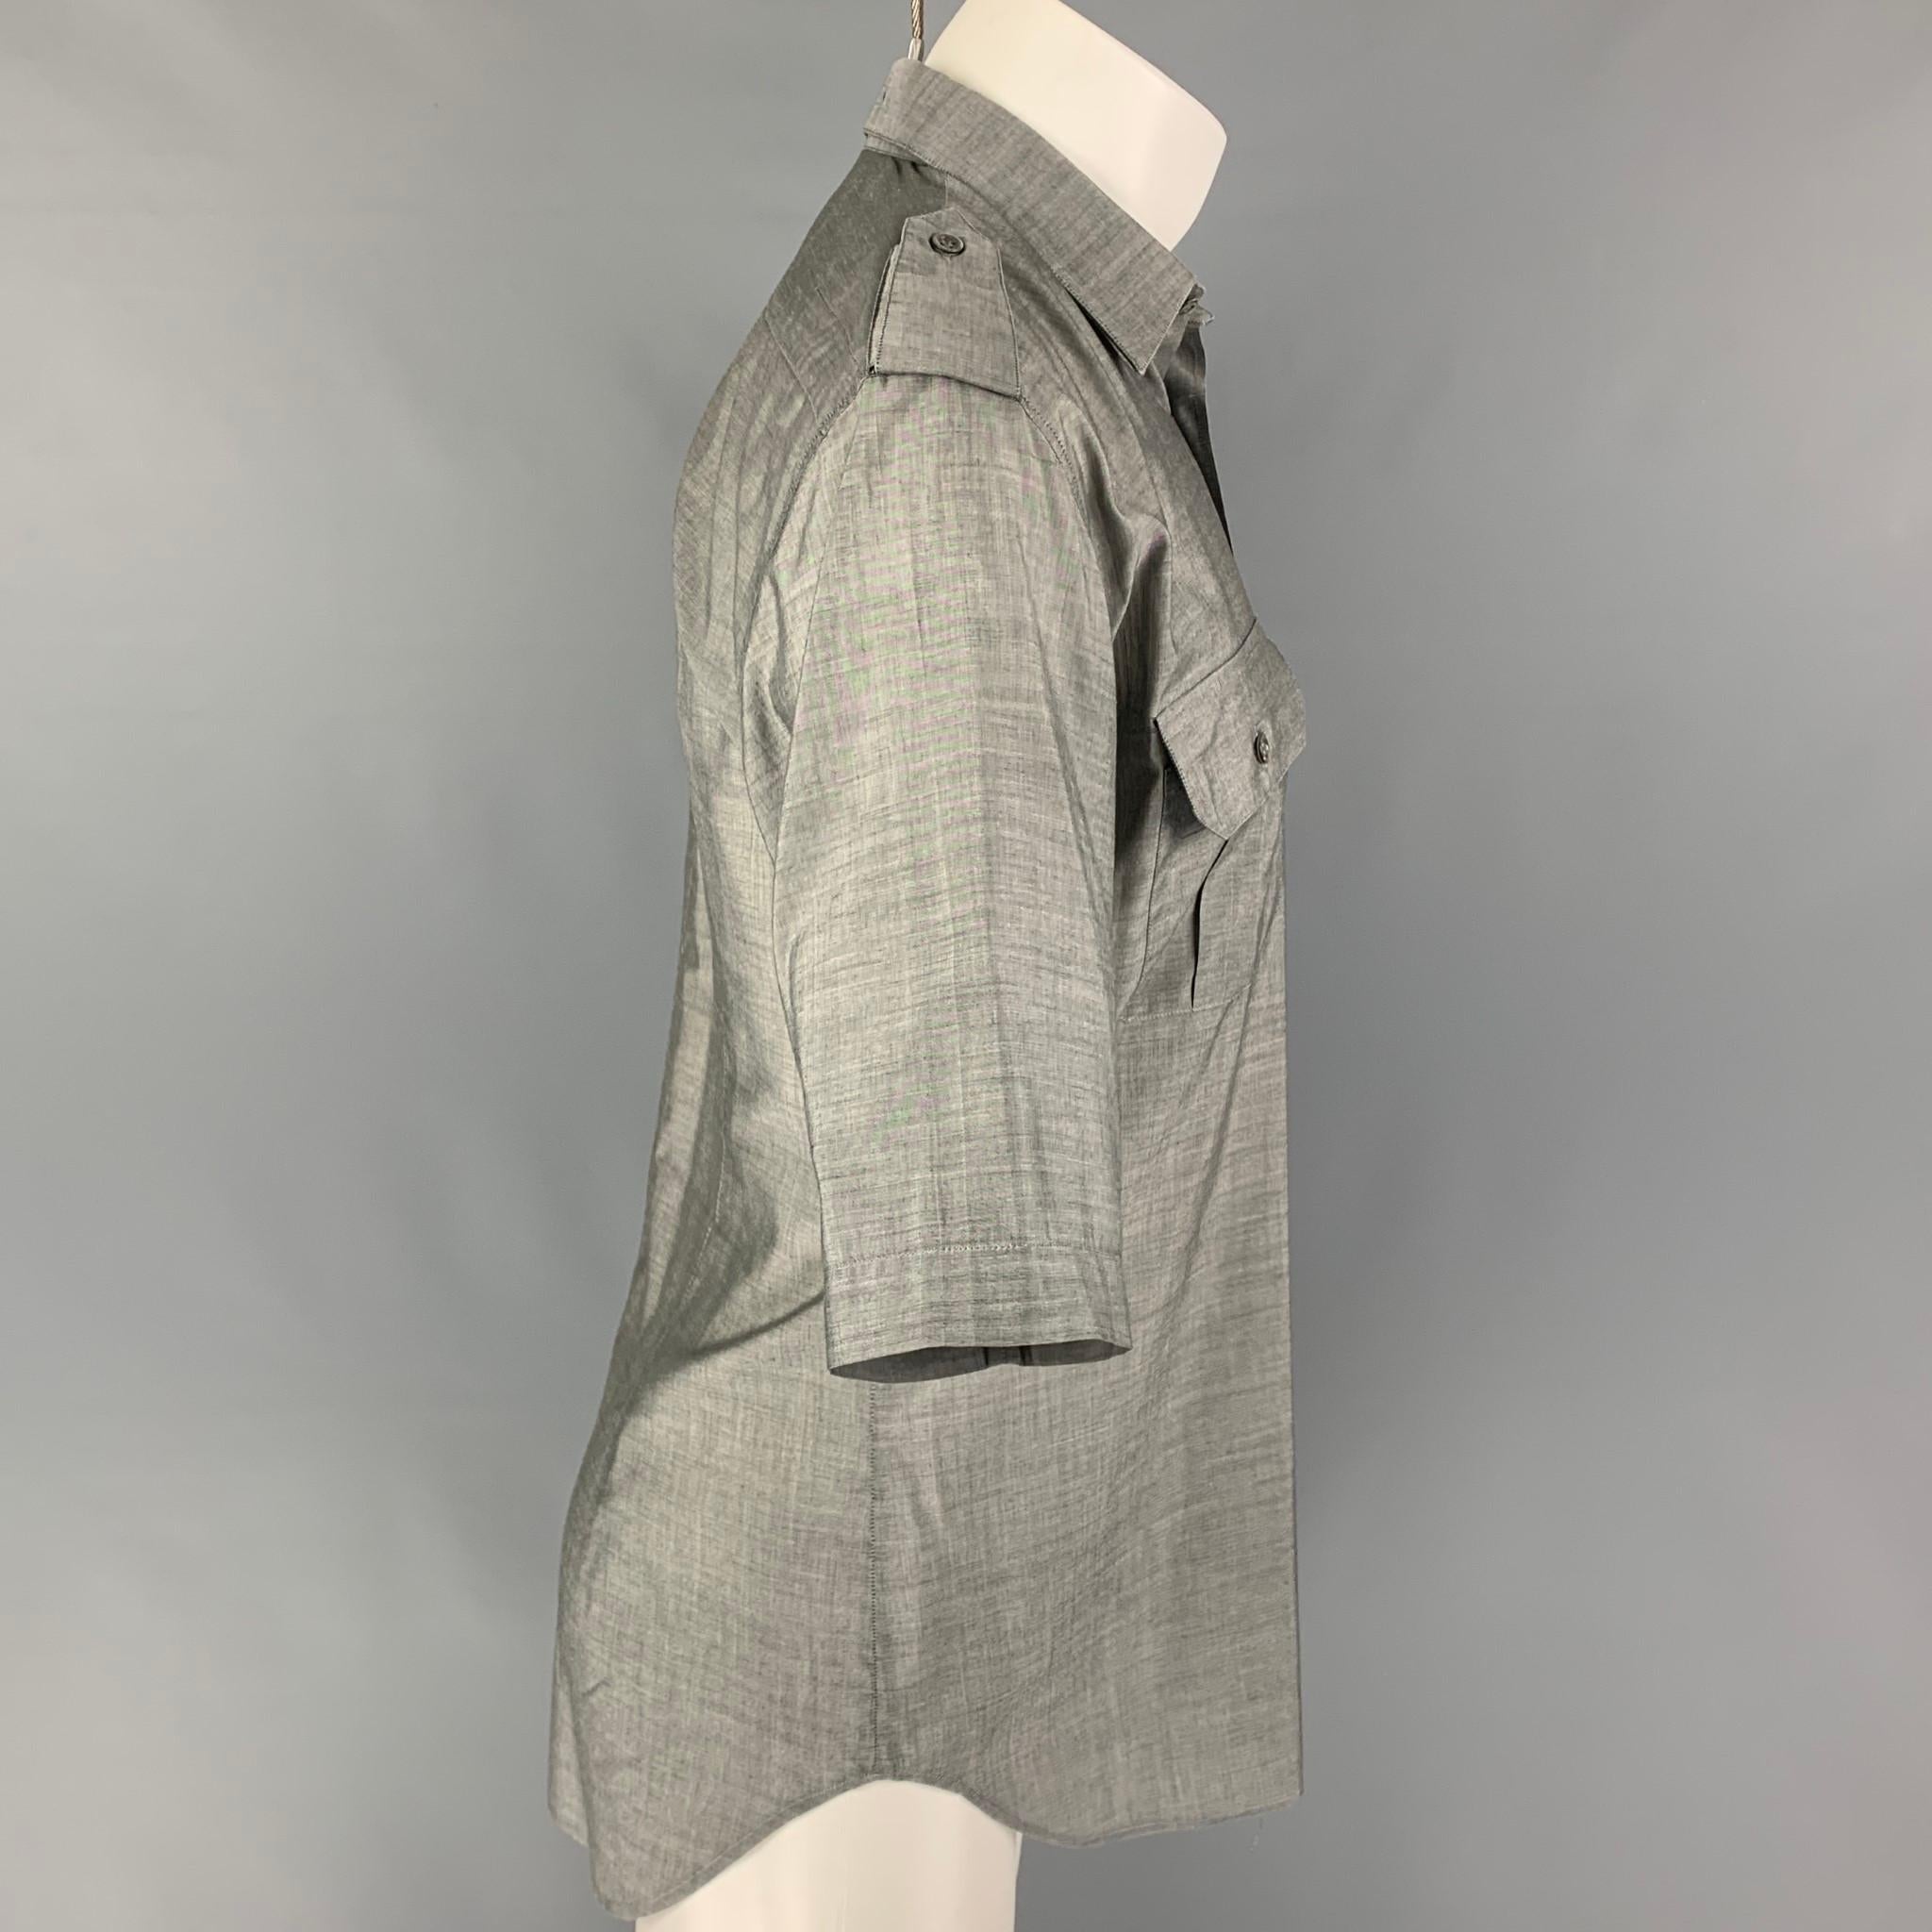 DIOR HOMME short sleeve shirt comes in a gray cotton / polyurethane featuring a spread collar, epaulettes, patch pockets, and a button up closure. 

Very Good Pre-Owned Condition.
Marked: 41

Measurements:

Shoulder: 19 in.
Chest: 41 in.
Sleeve: 13